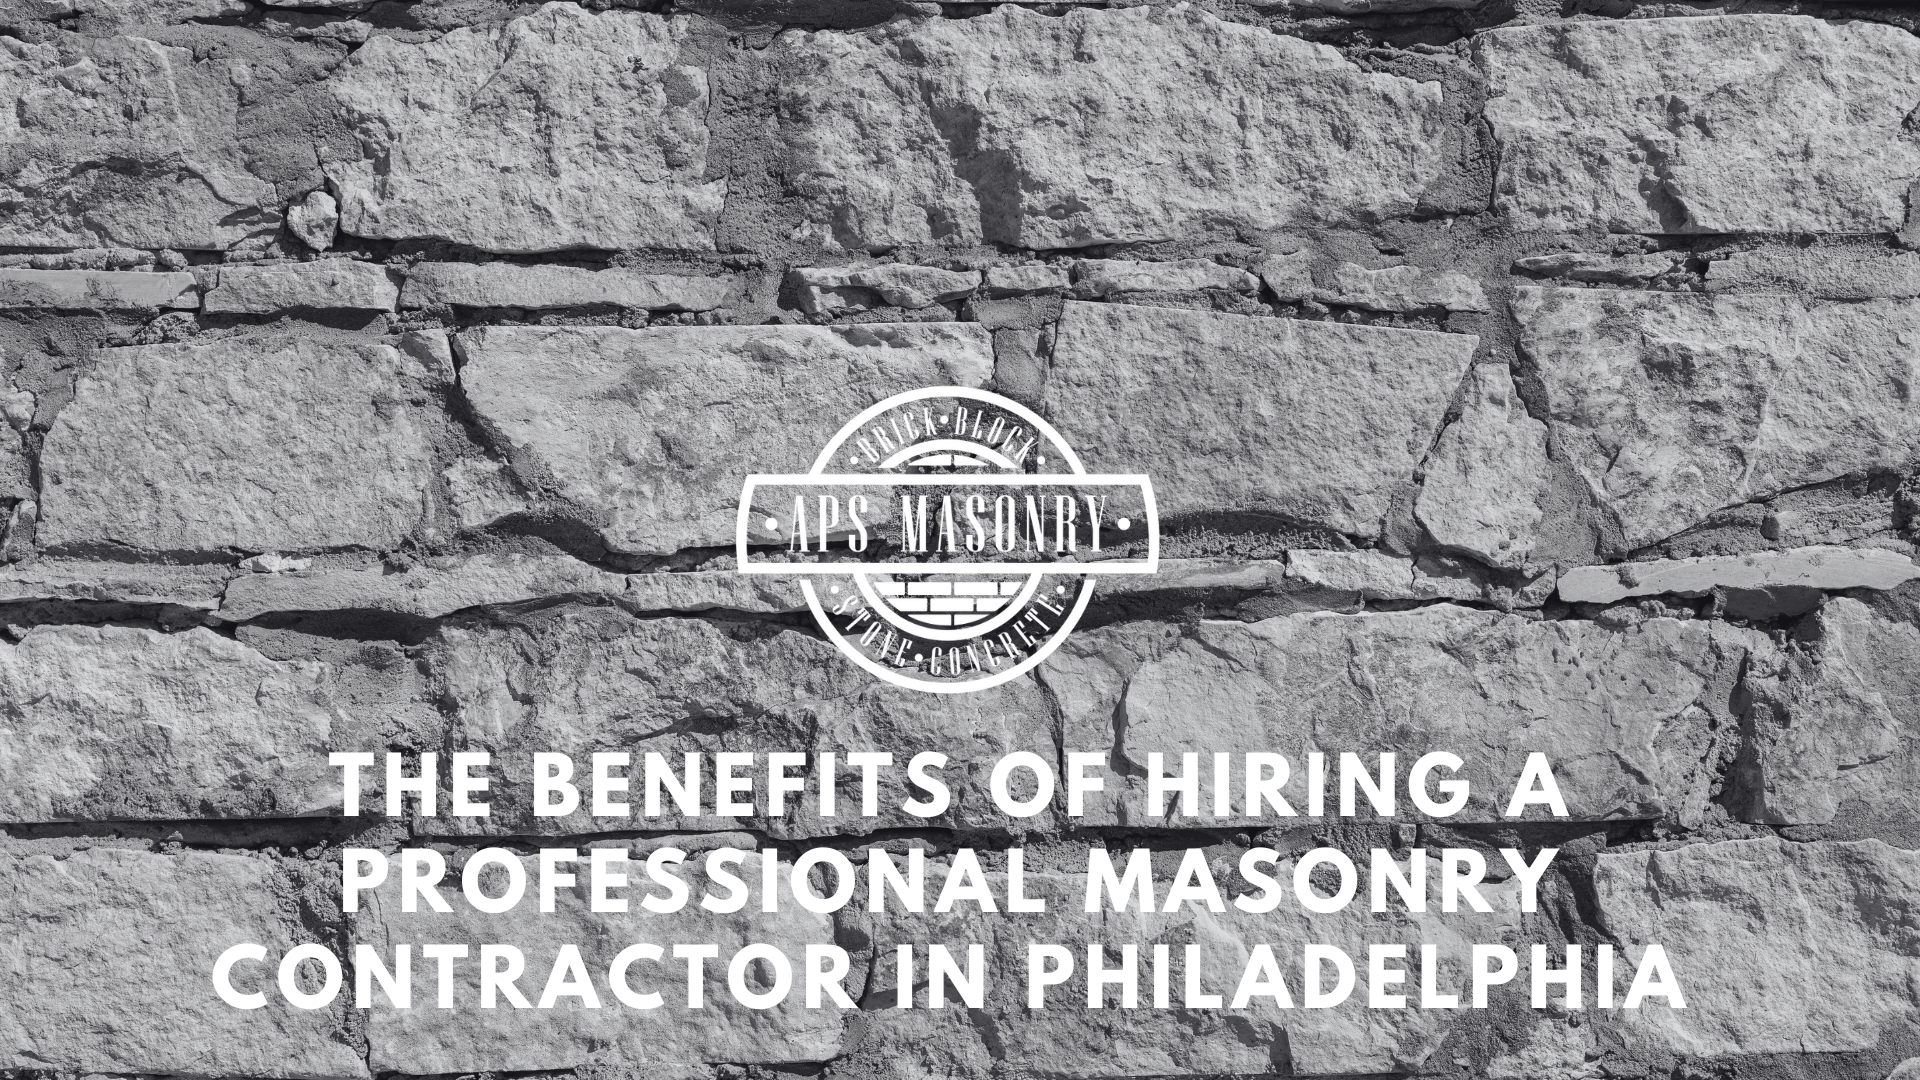 A grayscale close-up image of a stone wall texture, conveying a sense of sturdiness and craftsmanship associated with masonry work. Centered over the image is the APS Masonry logo, and below it, the text 